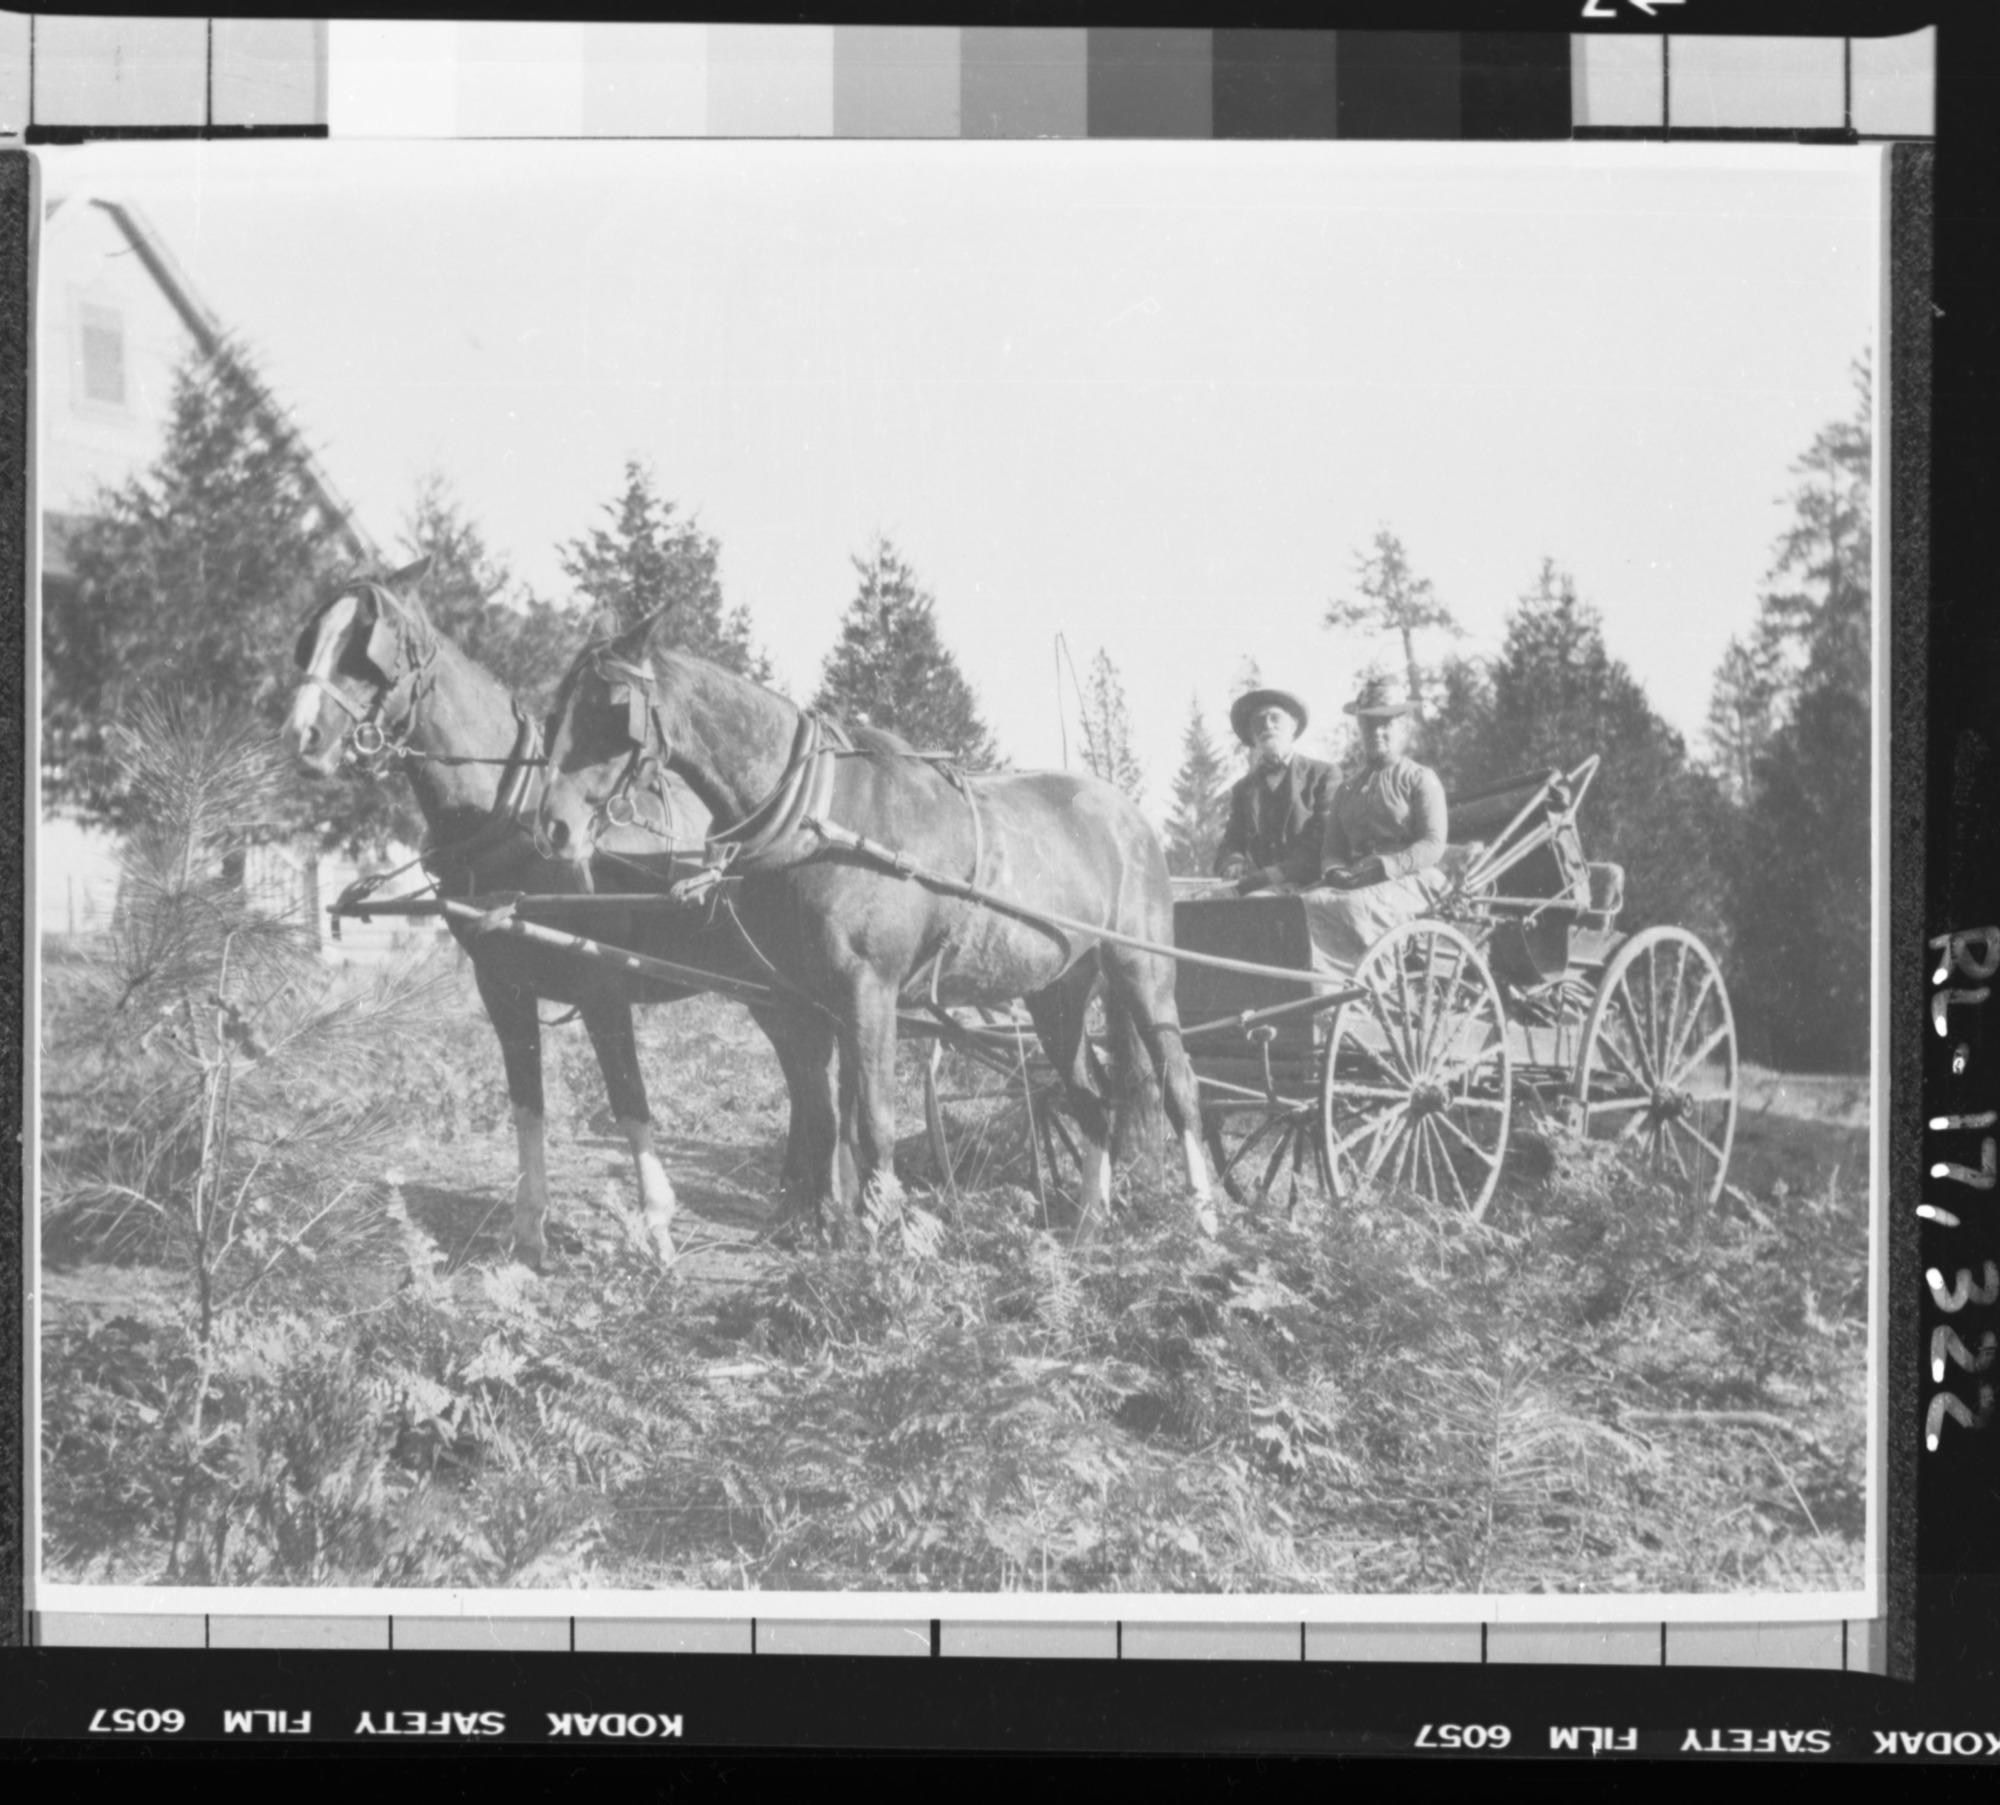 Copy Neg: J. Ernest, 1983. J. M. Hutchings & Emily Hutchings moments before J. M. was thrown form wagon and killed. Original print in over-sized photo drawer in RL.